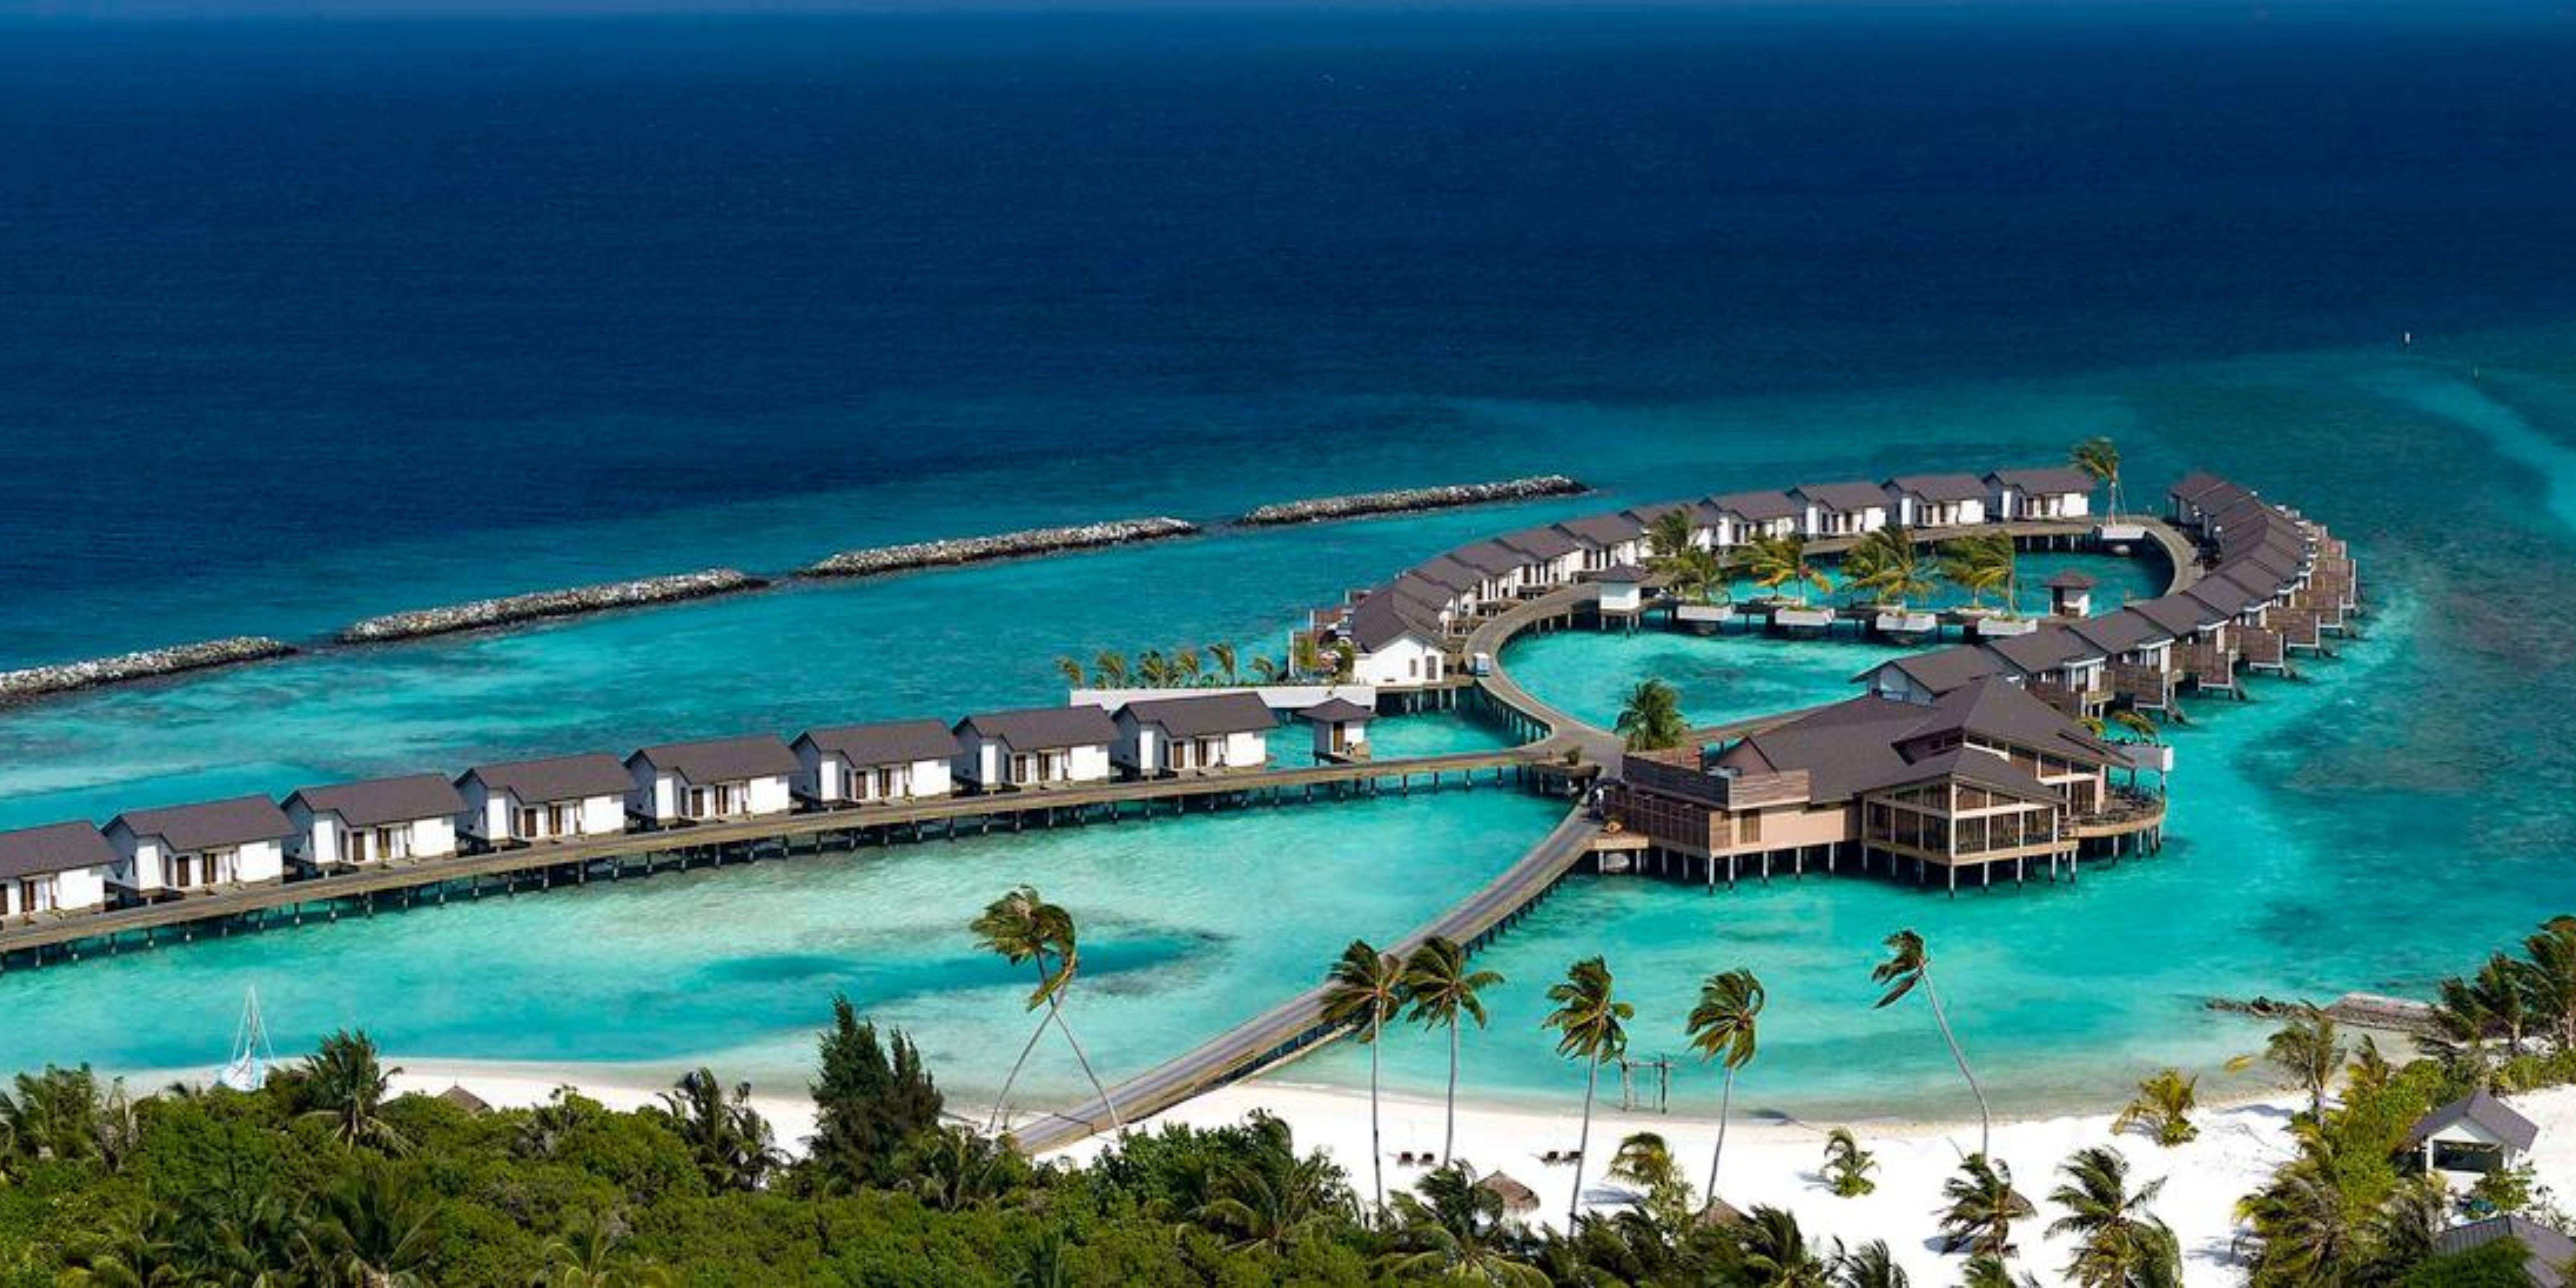 The Ultimate All-Inclusive Luxury: The Kanifushi Plan in the Maldives